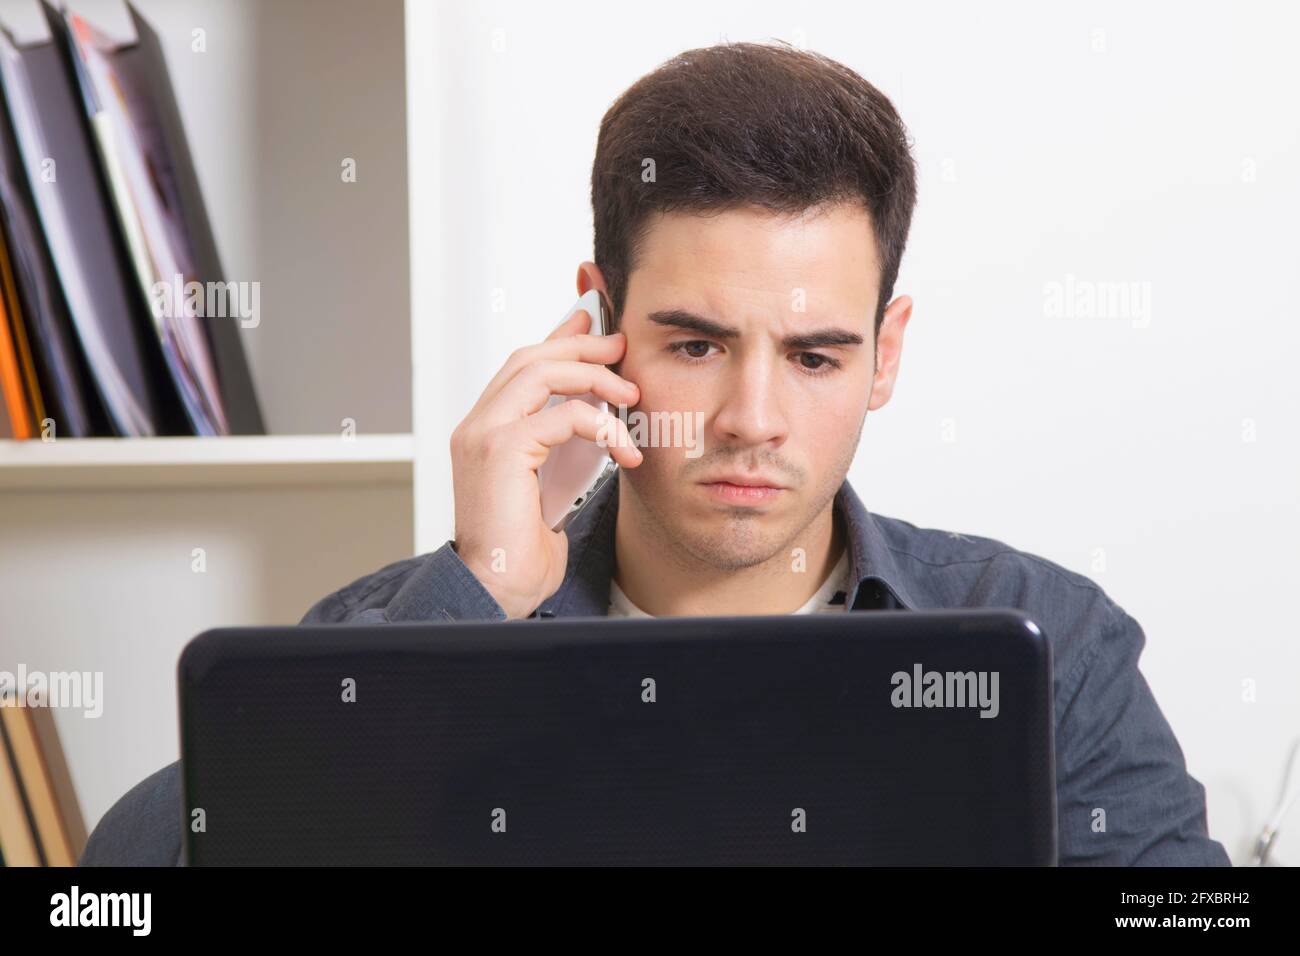 man in the office or home speaking by phone Stock Photo